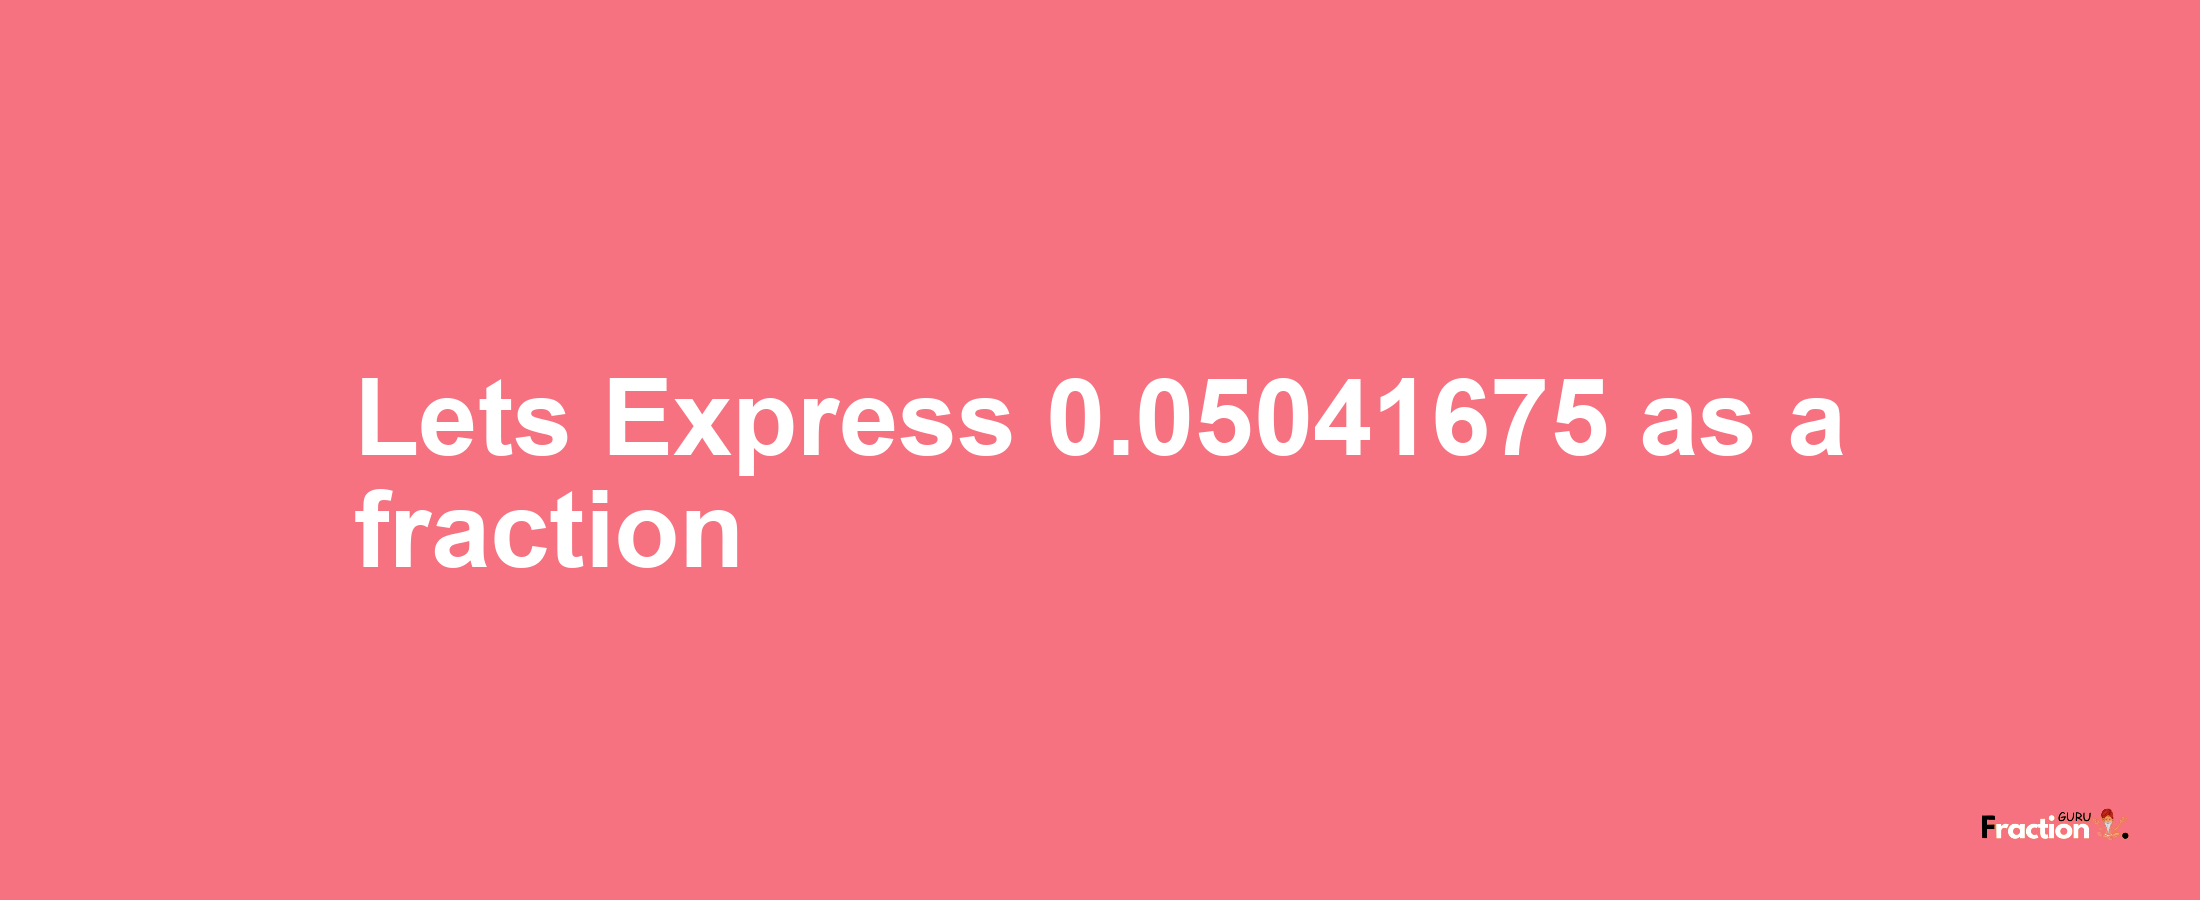 Lets Express 0.05041675 as afraction